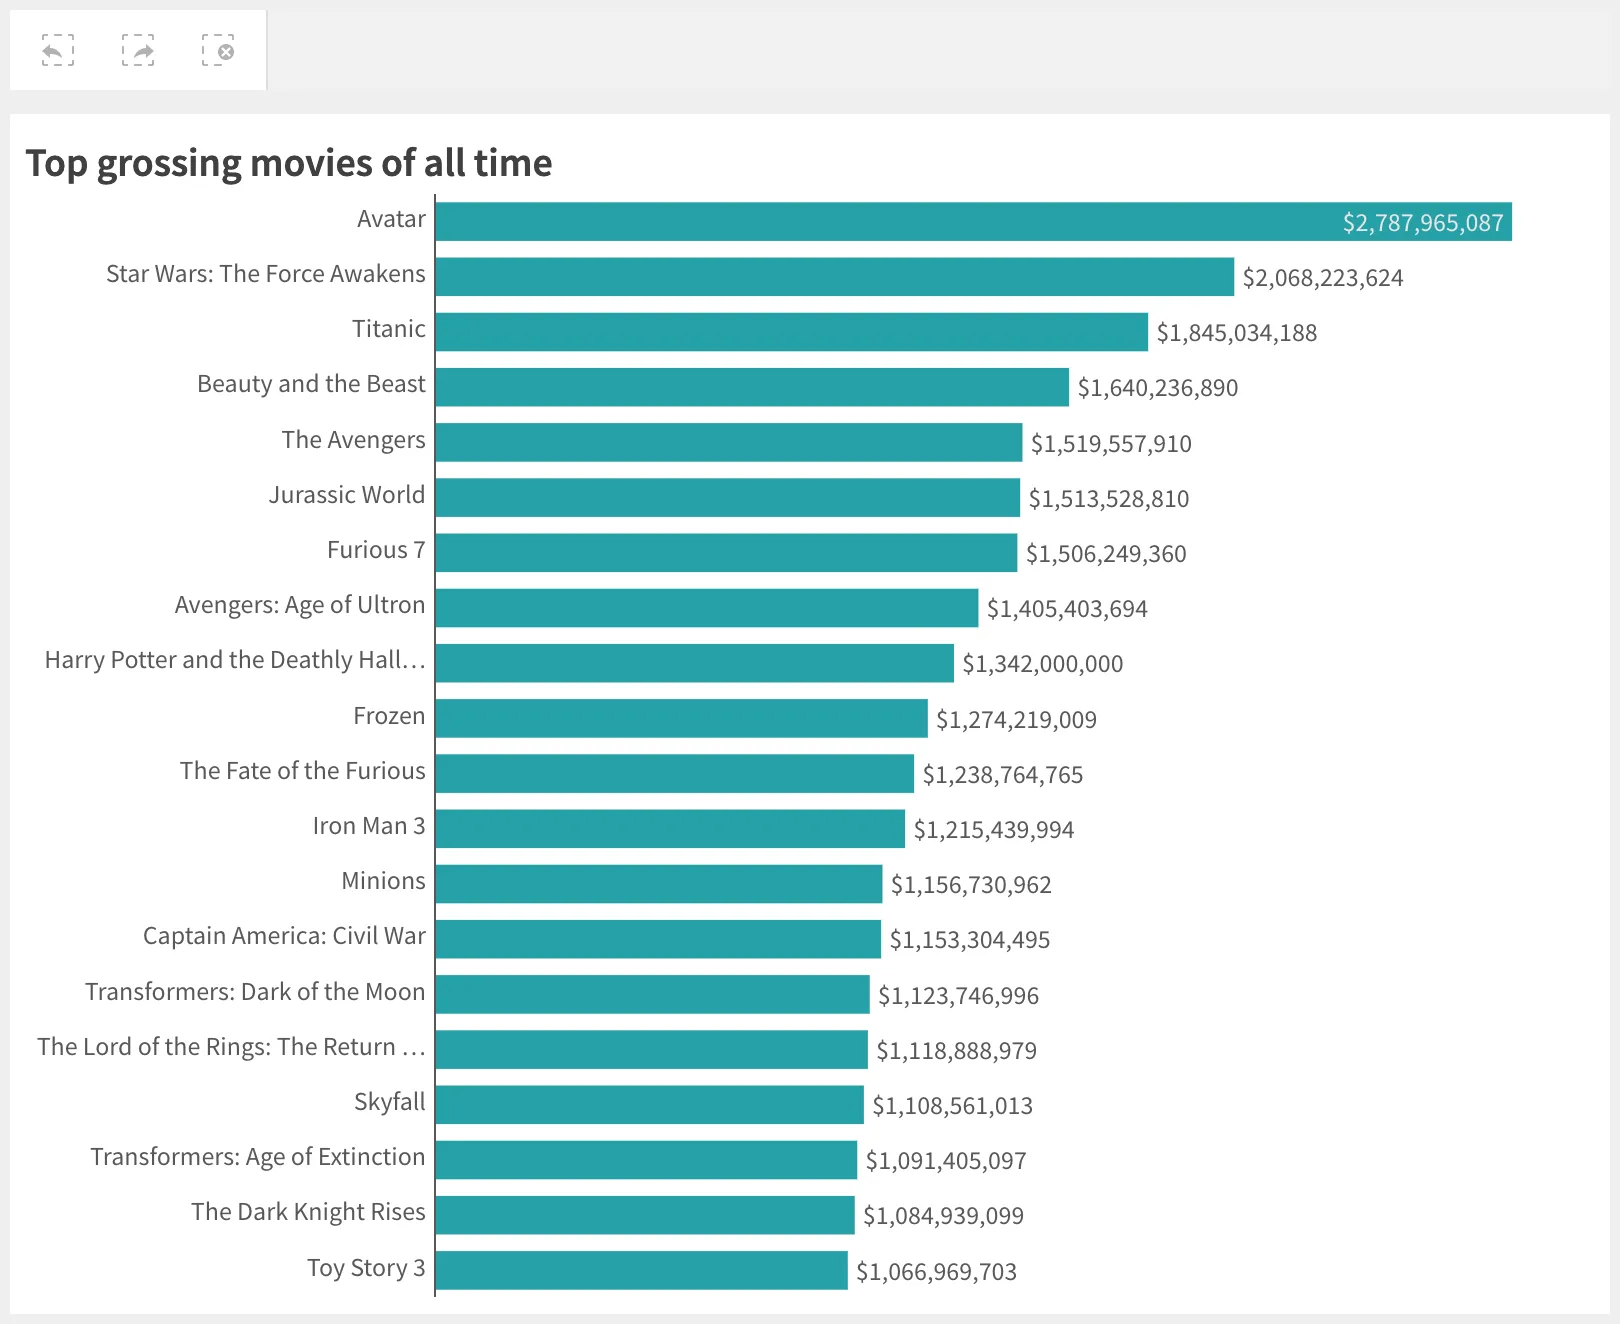 Bar chart representing 'Top grossing movies of all time'